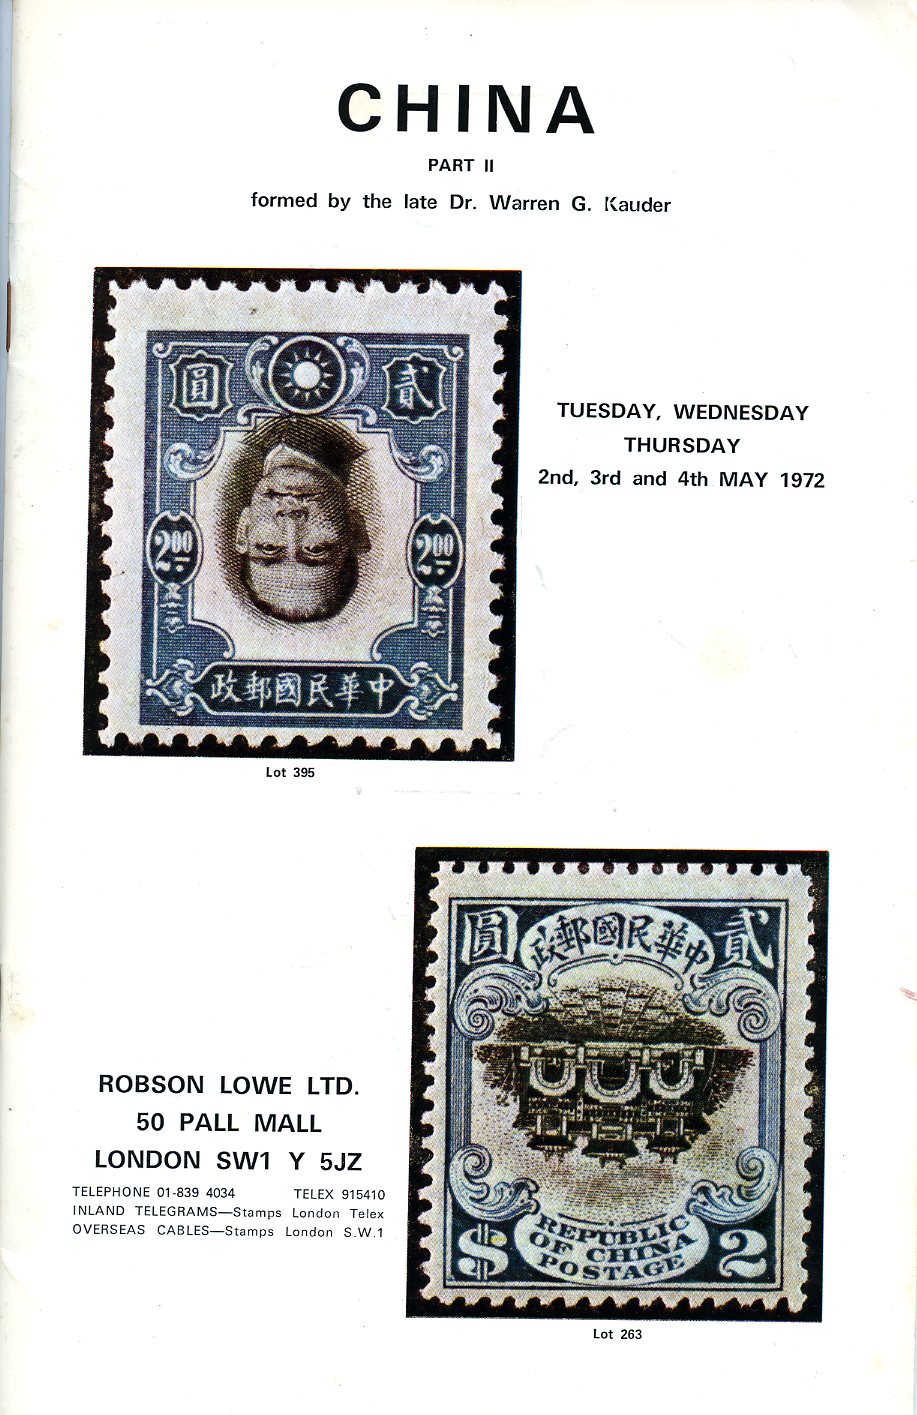 Robson Lowe Auction Nos. 3569-70, 3619-23, The Dr. Warren G. Kauder China Second Portion Parts 1 and II (5/1972), with prices realized, light pencil notation of some prices, otherwise in excellent condition (9 oz) (2 images)